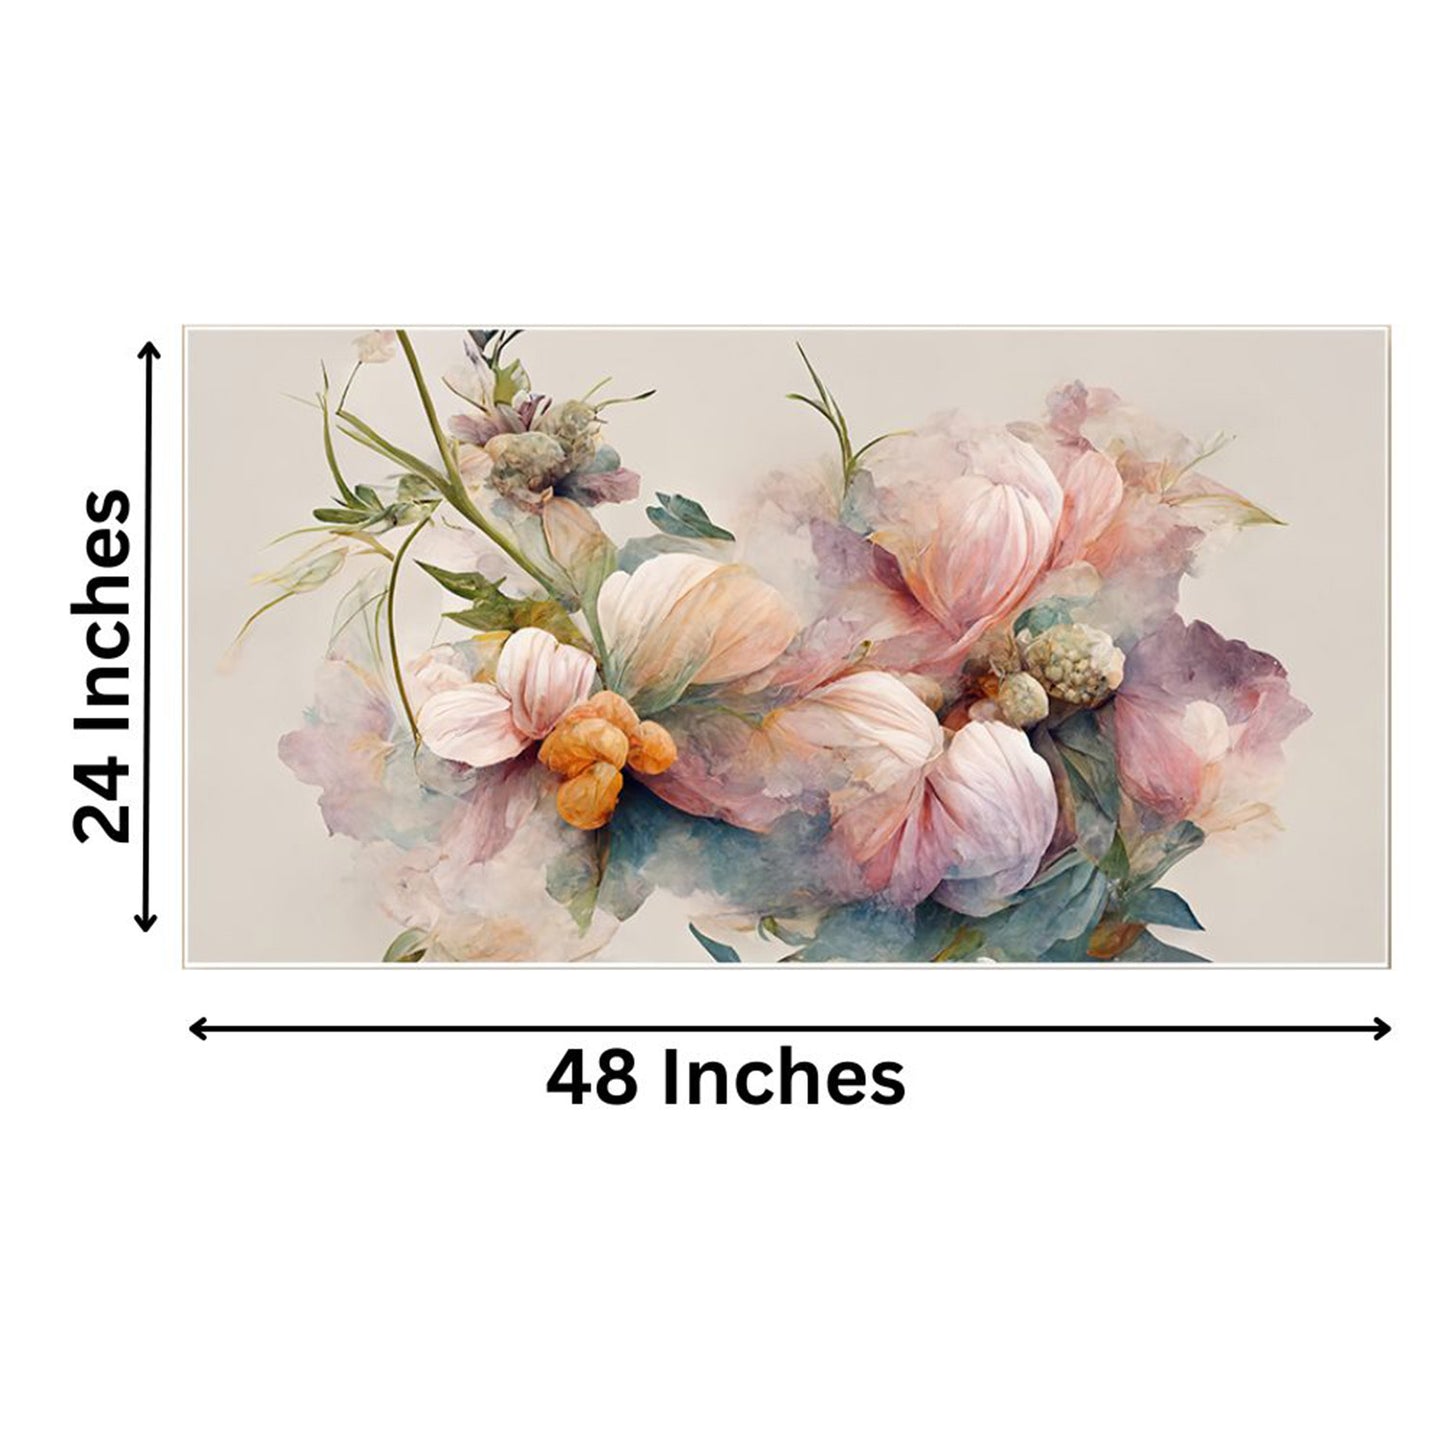 Elegant Bouquet: Capturing Nature's Beauty Wall Painting